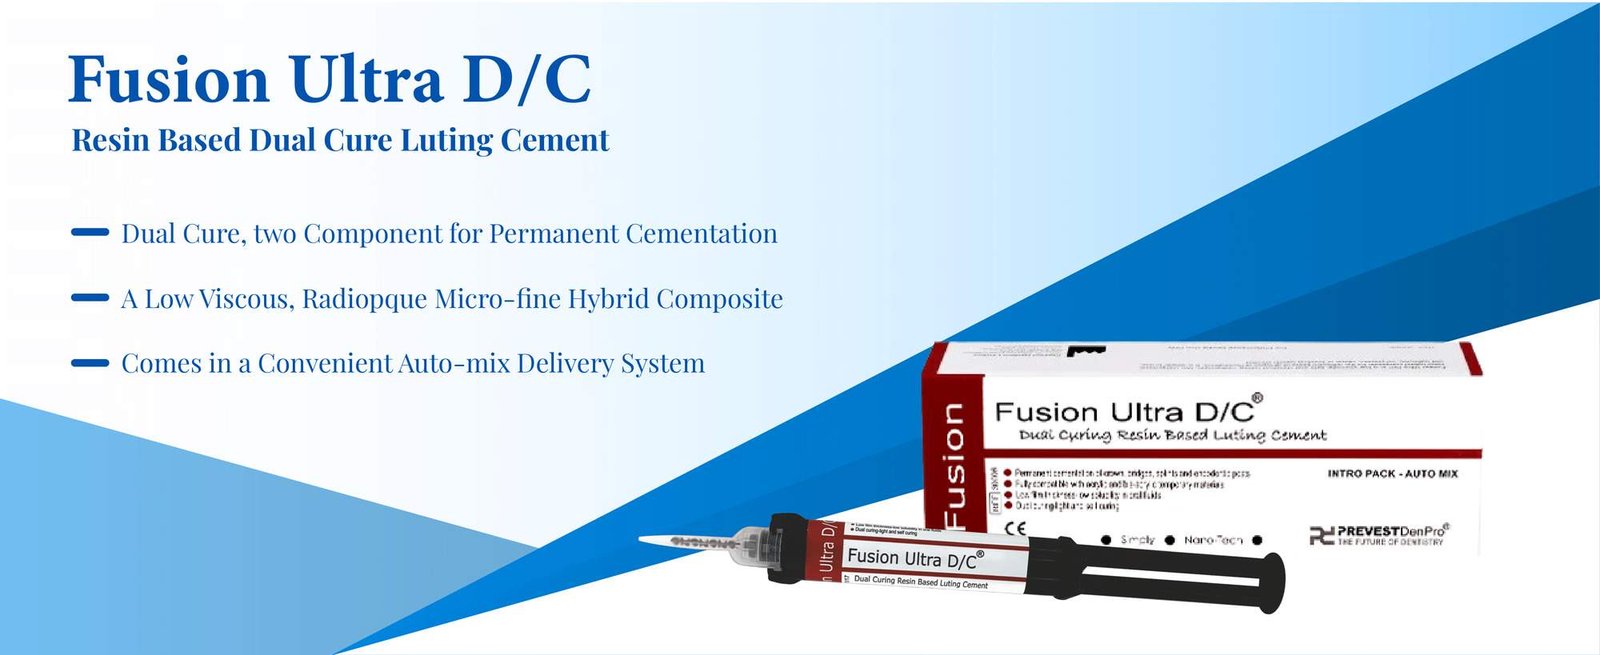 dual cure Resin based luting cement